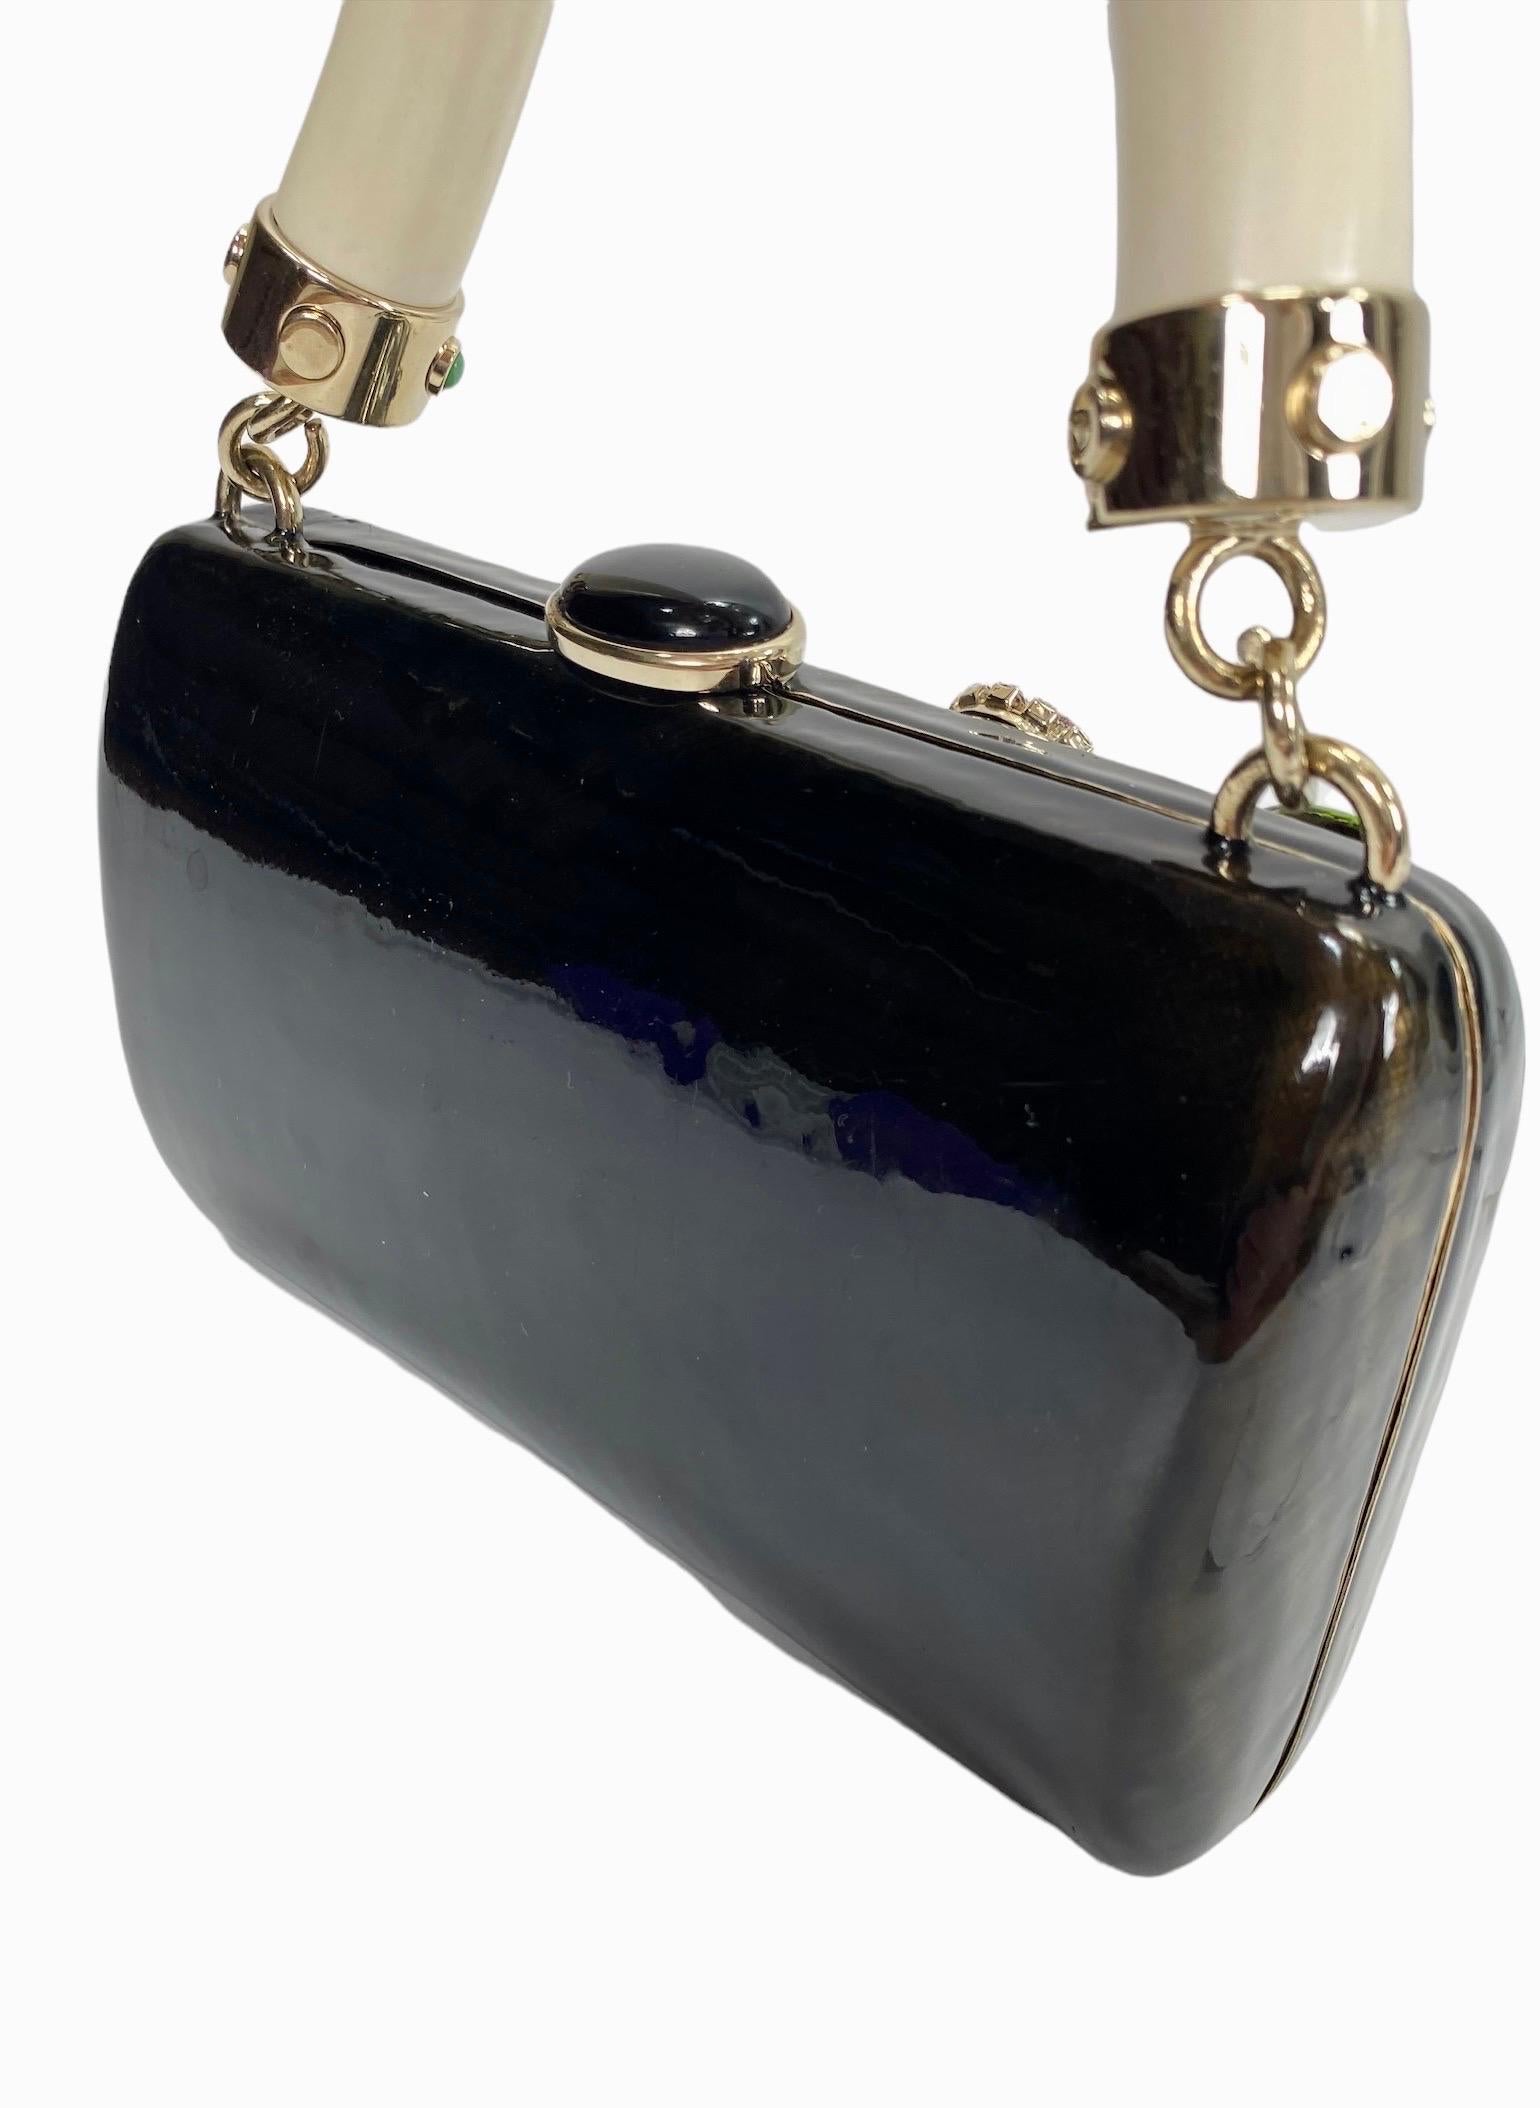 Tom Ford for Yves Saint Laurent Rive Gauche S/S 2004 Enamel Jeweled Clutch Bag For Sale 4